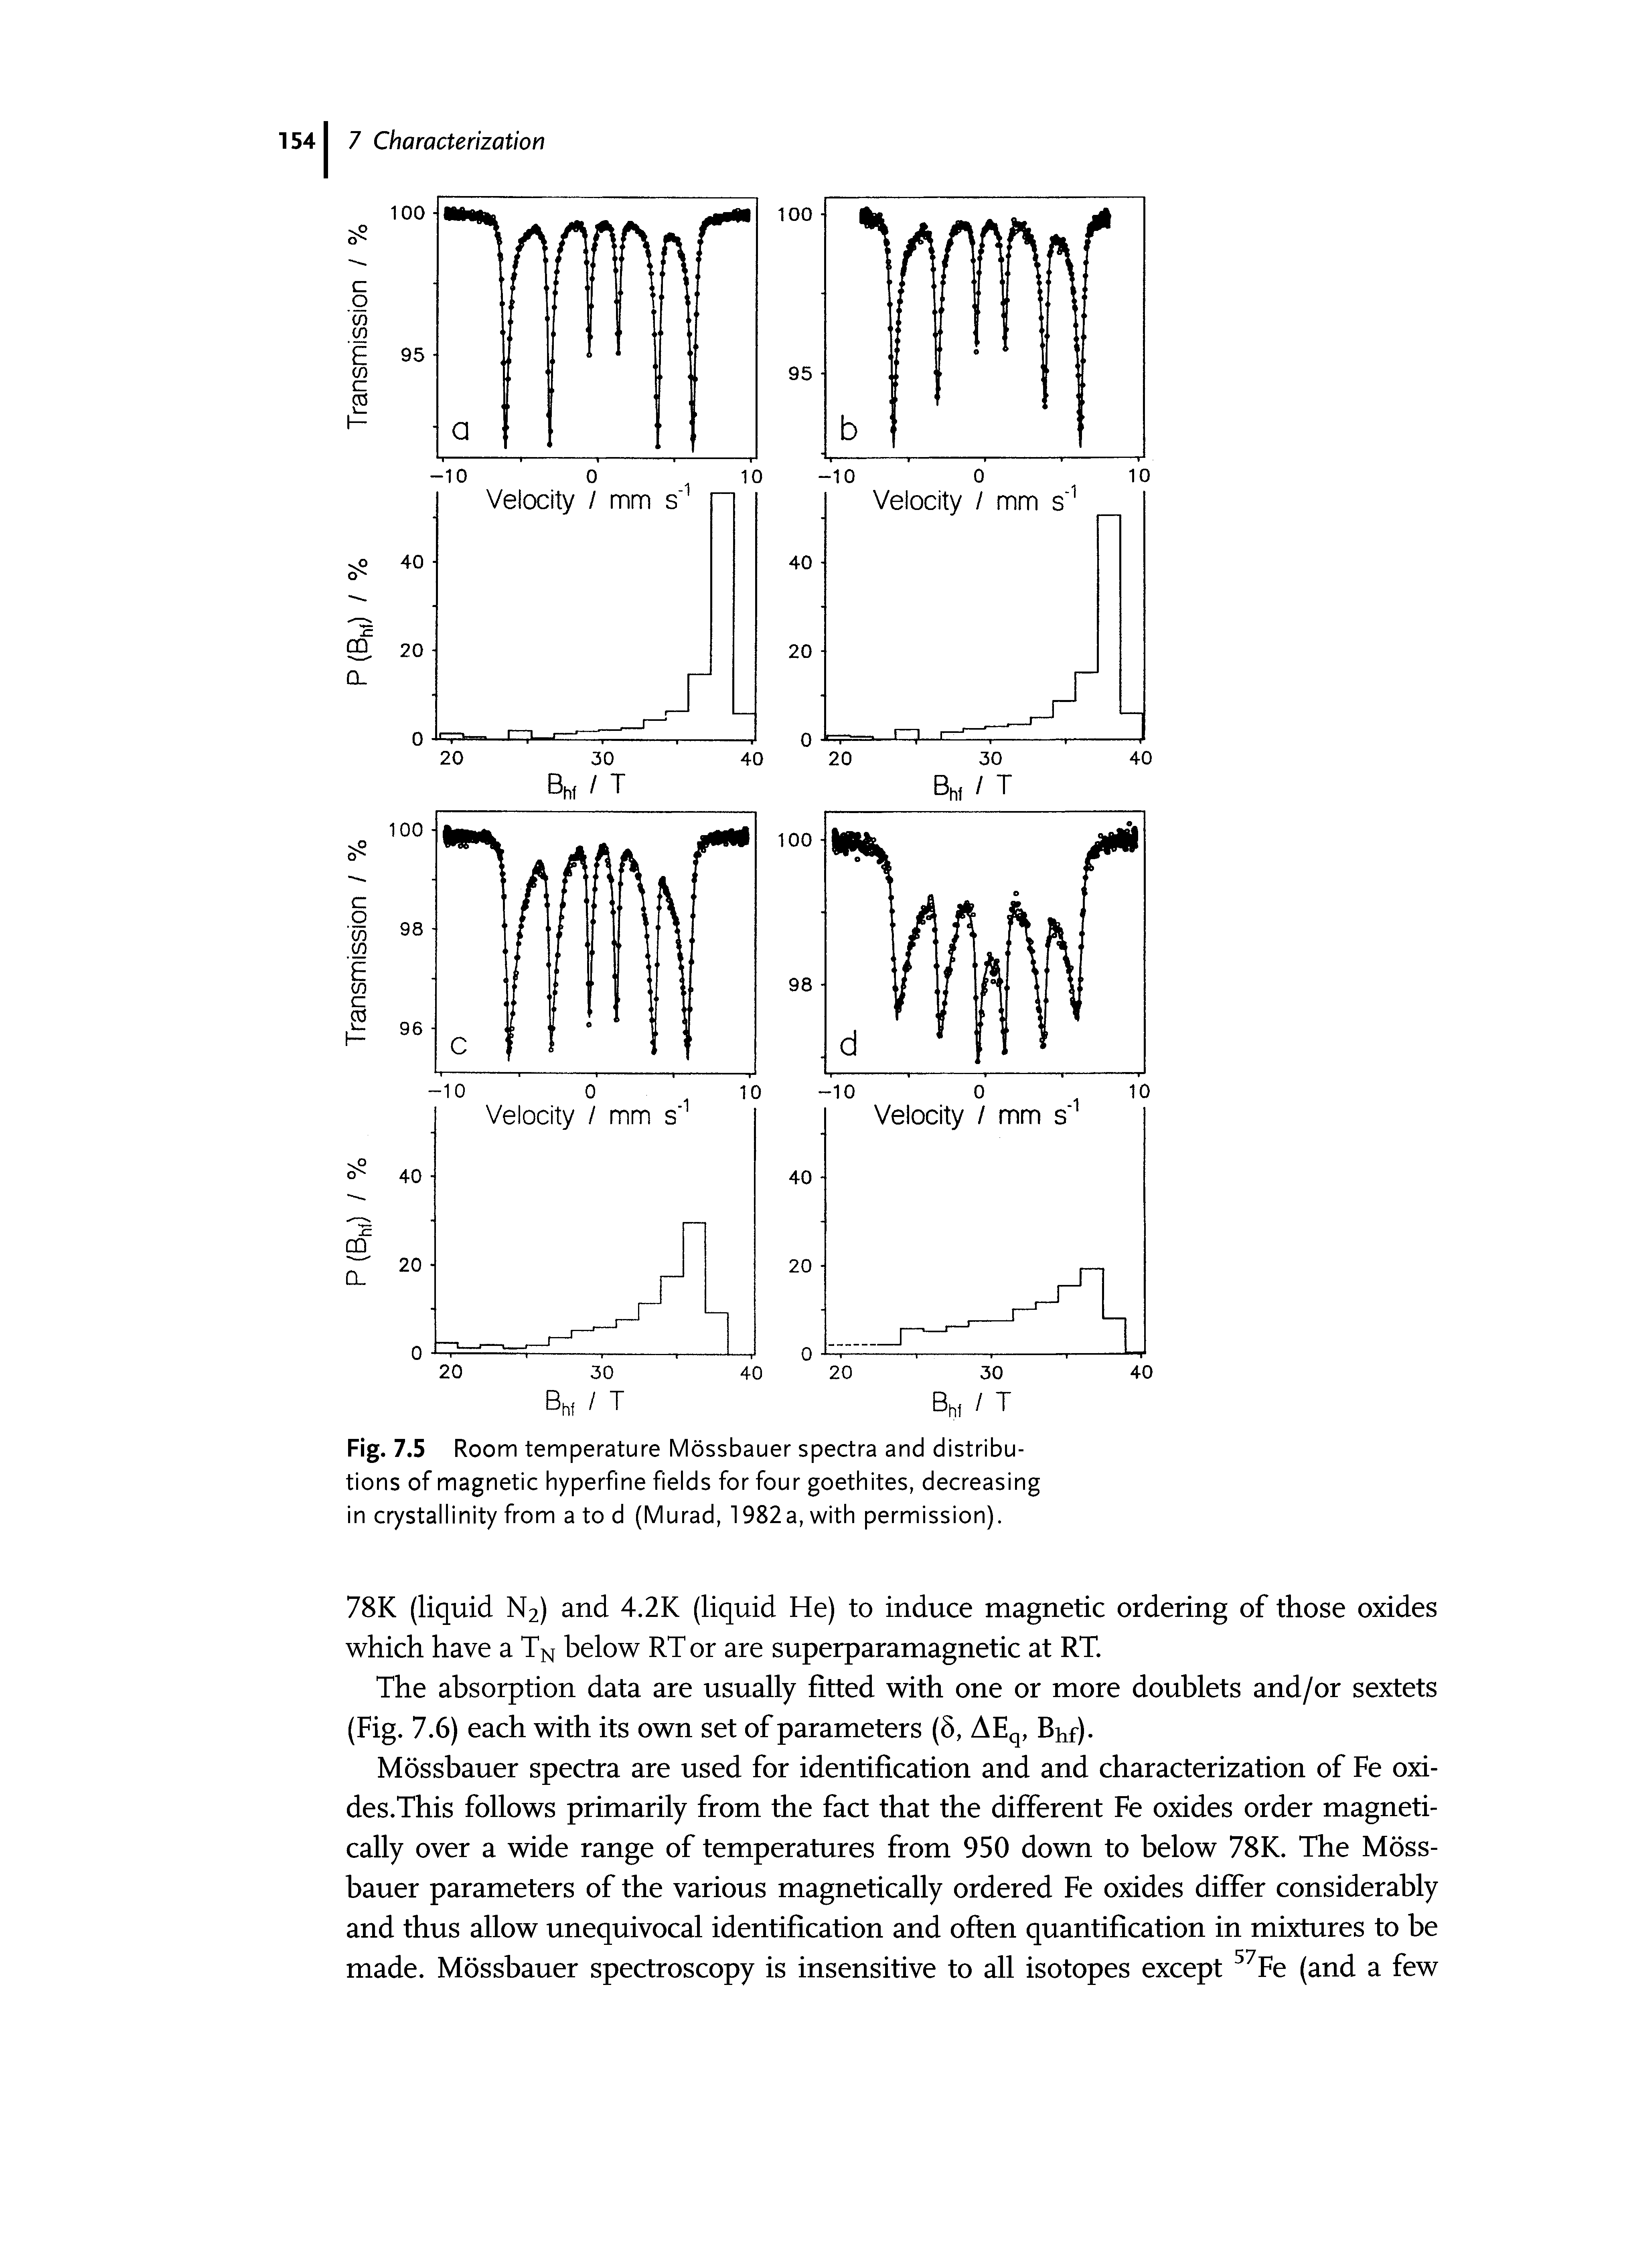 Fig. 7.5 Room temperature Mossbauer spectra and distributions of magnetic hyperfine fields for four goethites, decreasing in crystallinity from a to d (Murad, 1982a, with permission).